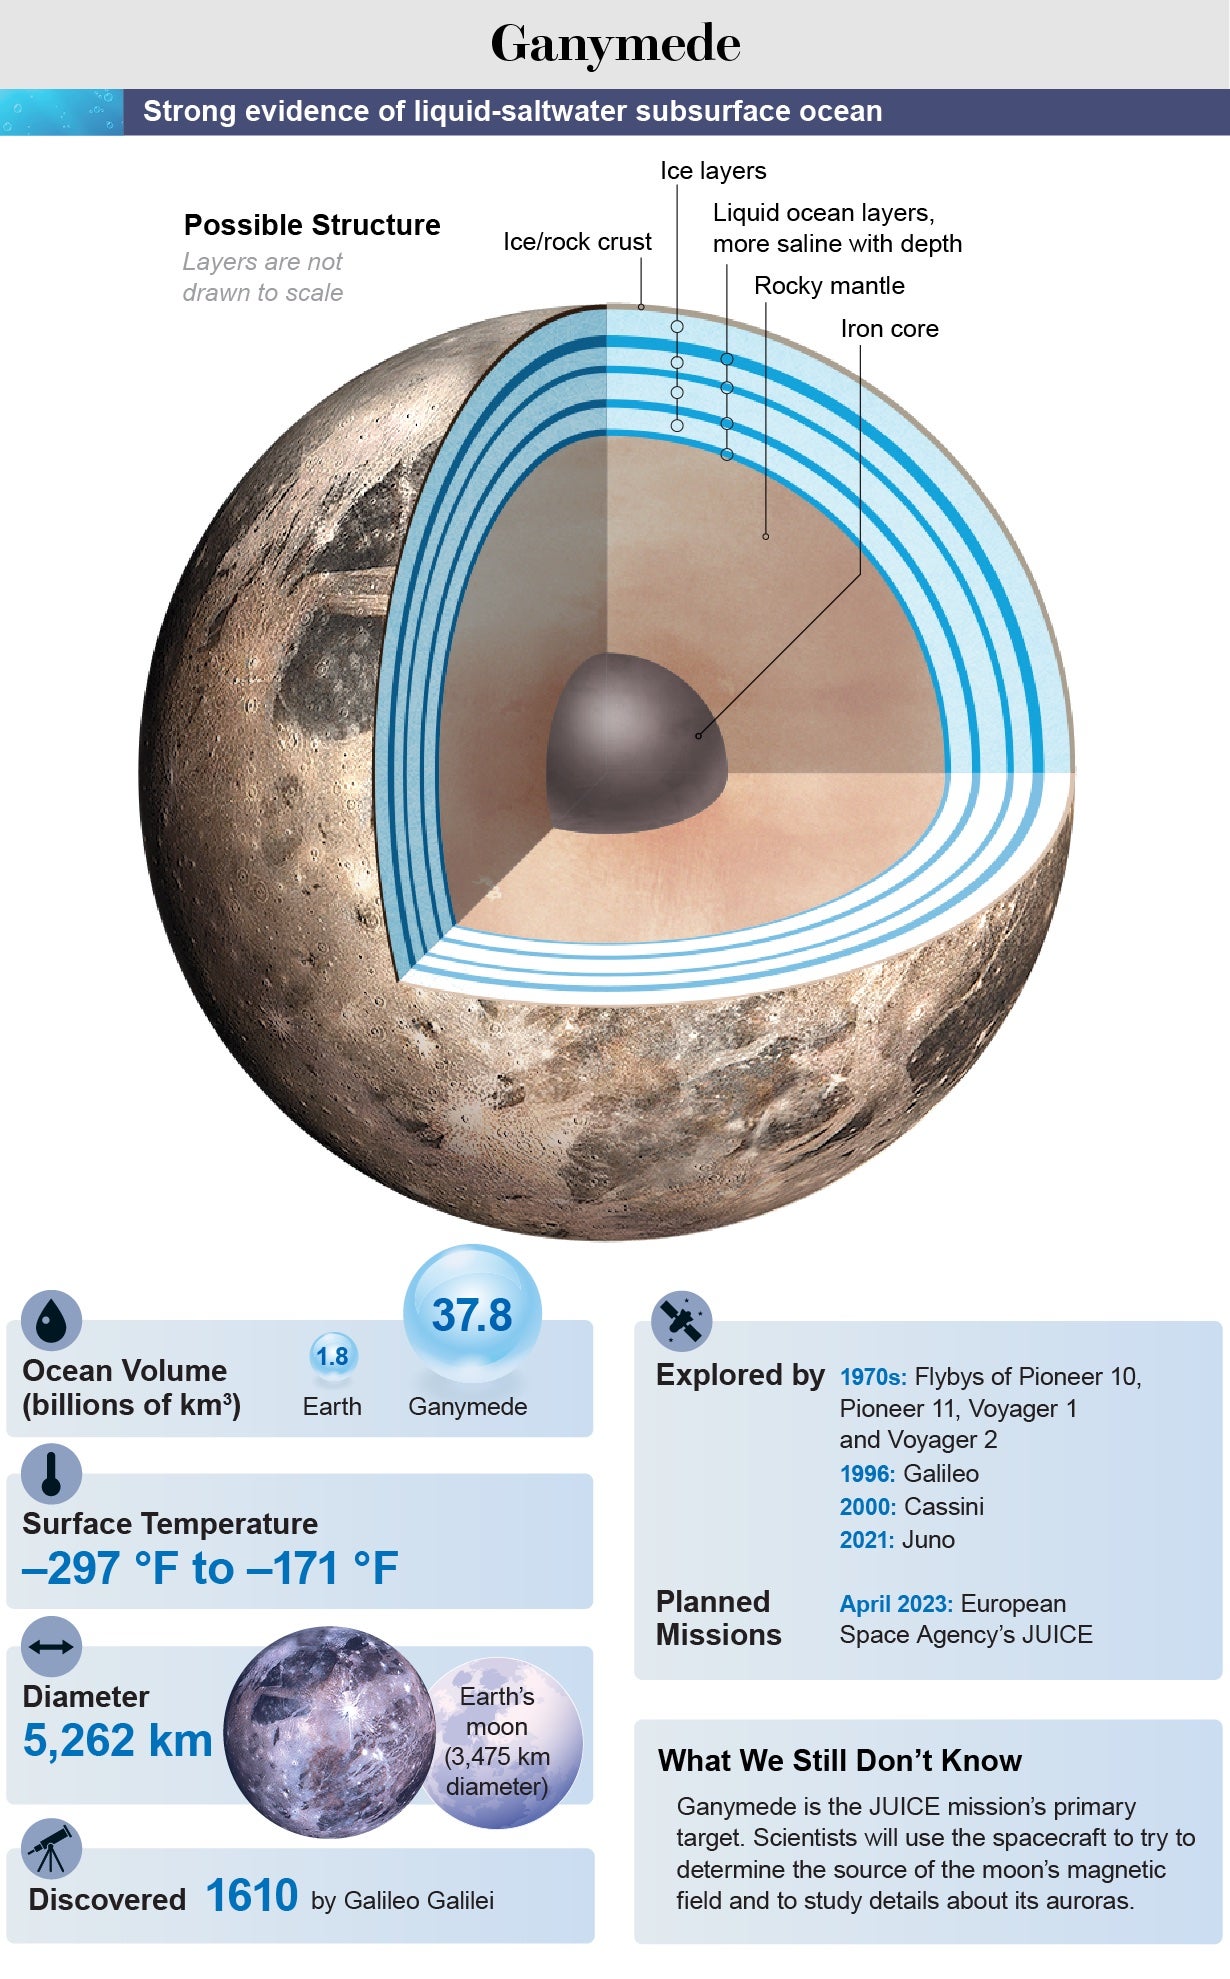 View inside Ganymede—showing an iron core, rocky mantle, four liquid subsurface ocean layers separated by four ice layers, and an ice/rock crust—paired with a cross section of the ocean and moon statistics.